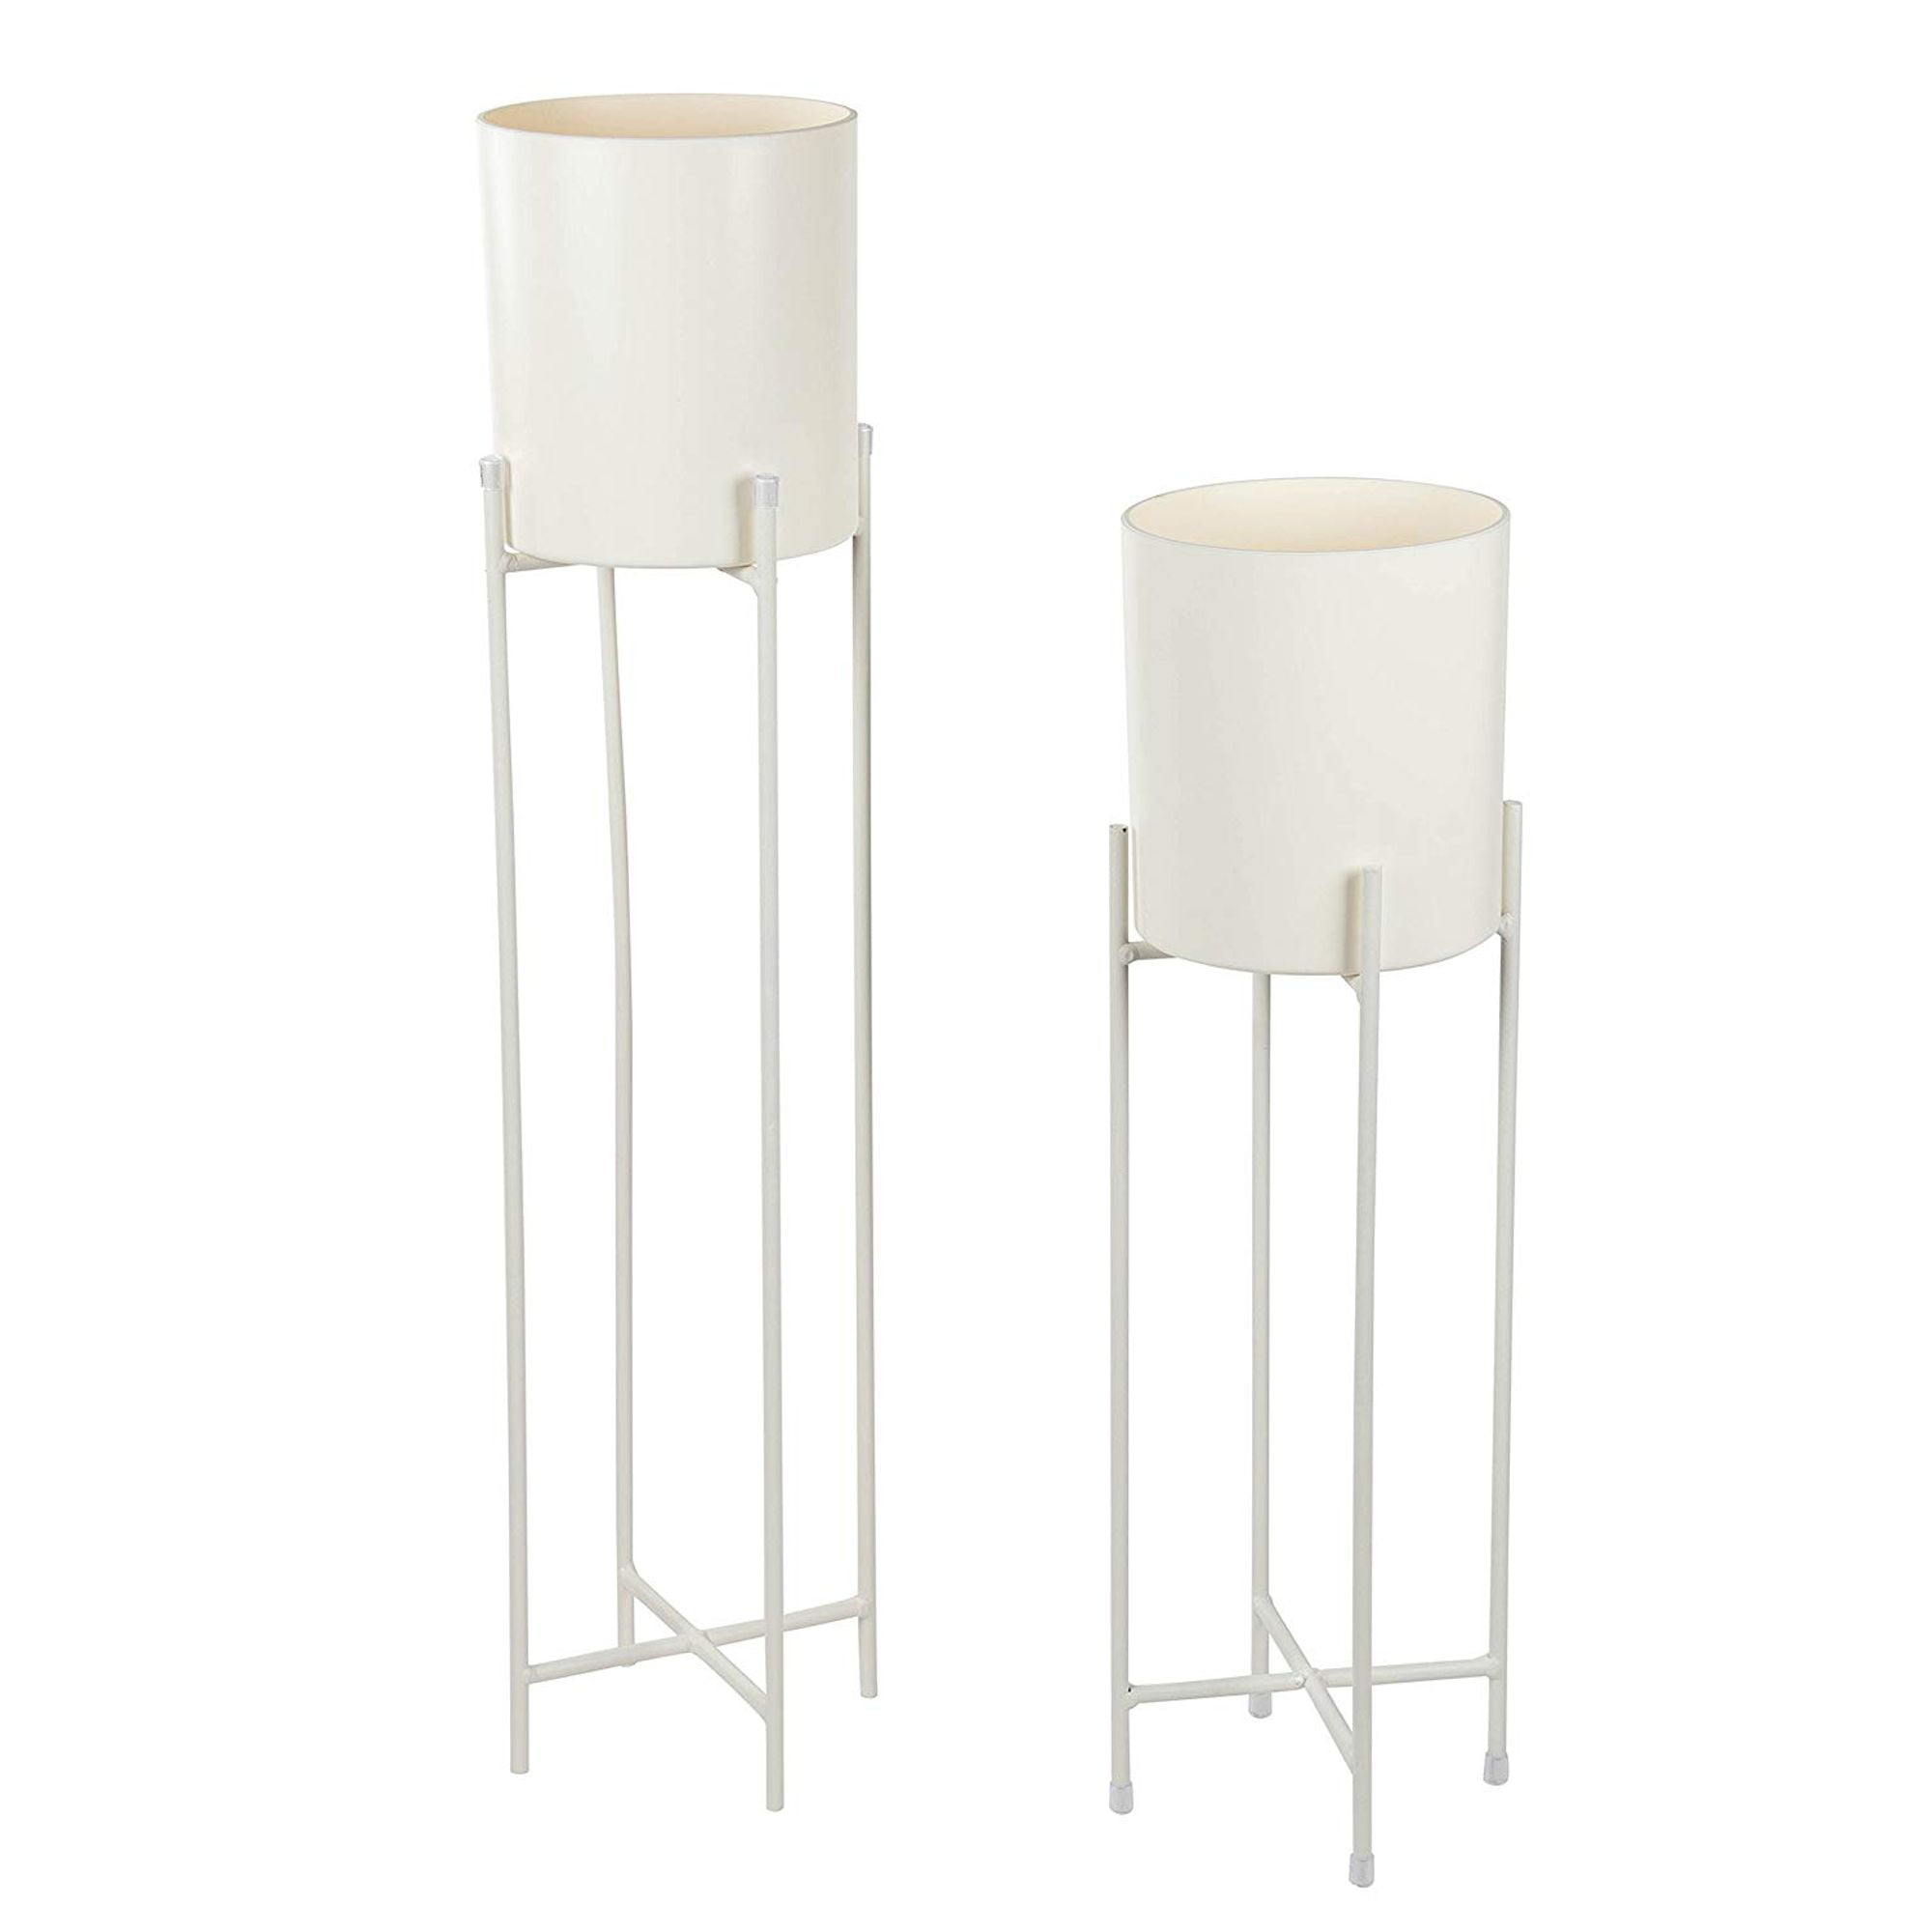 Plant Stand Set 2Piece Modern Plastic Planter with Tall